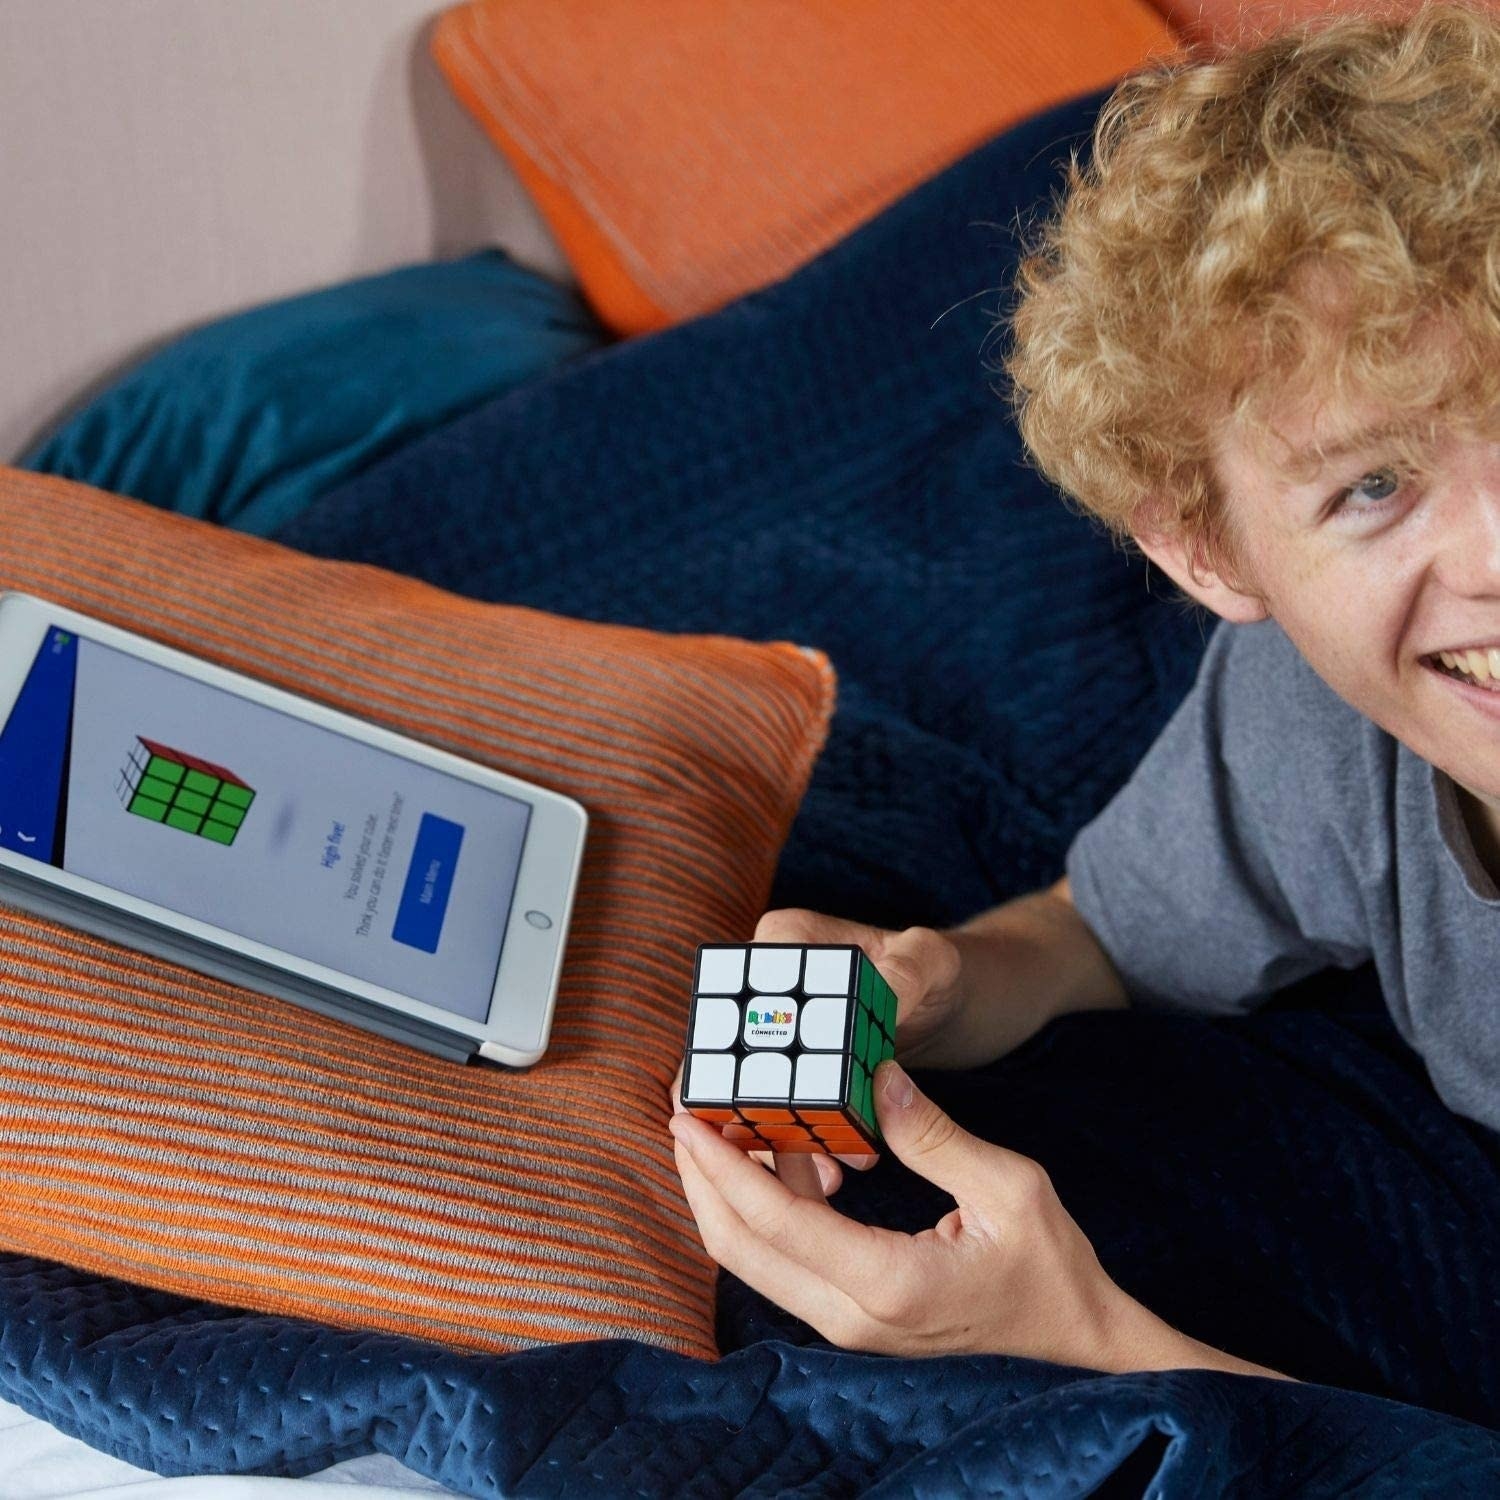 A person solving the cube with the app on their tablet in front of them